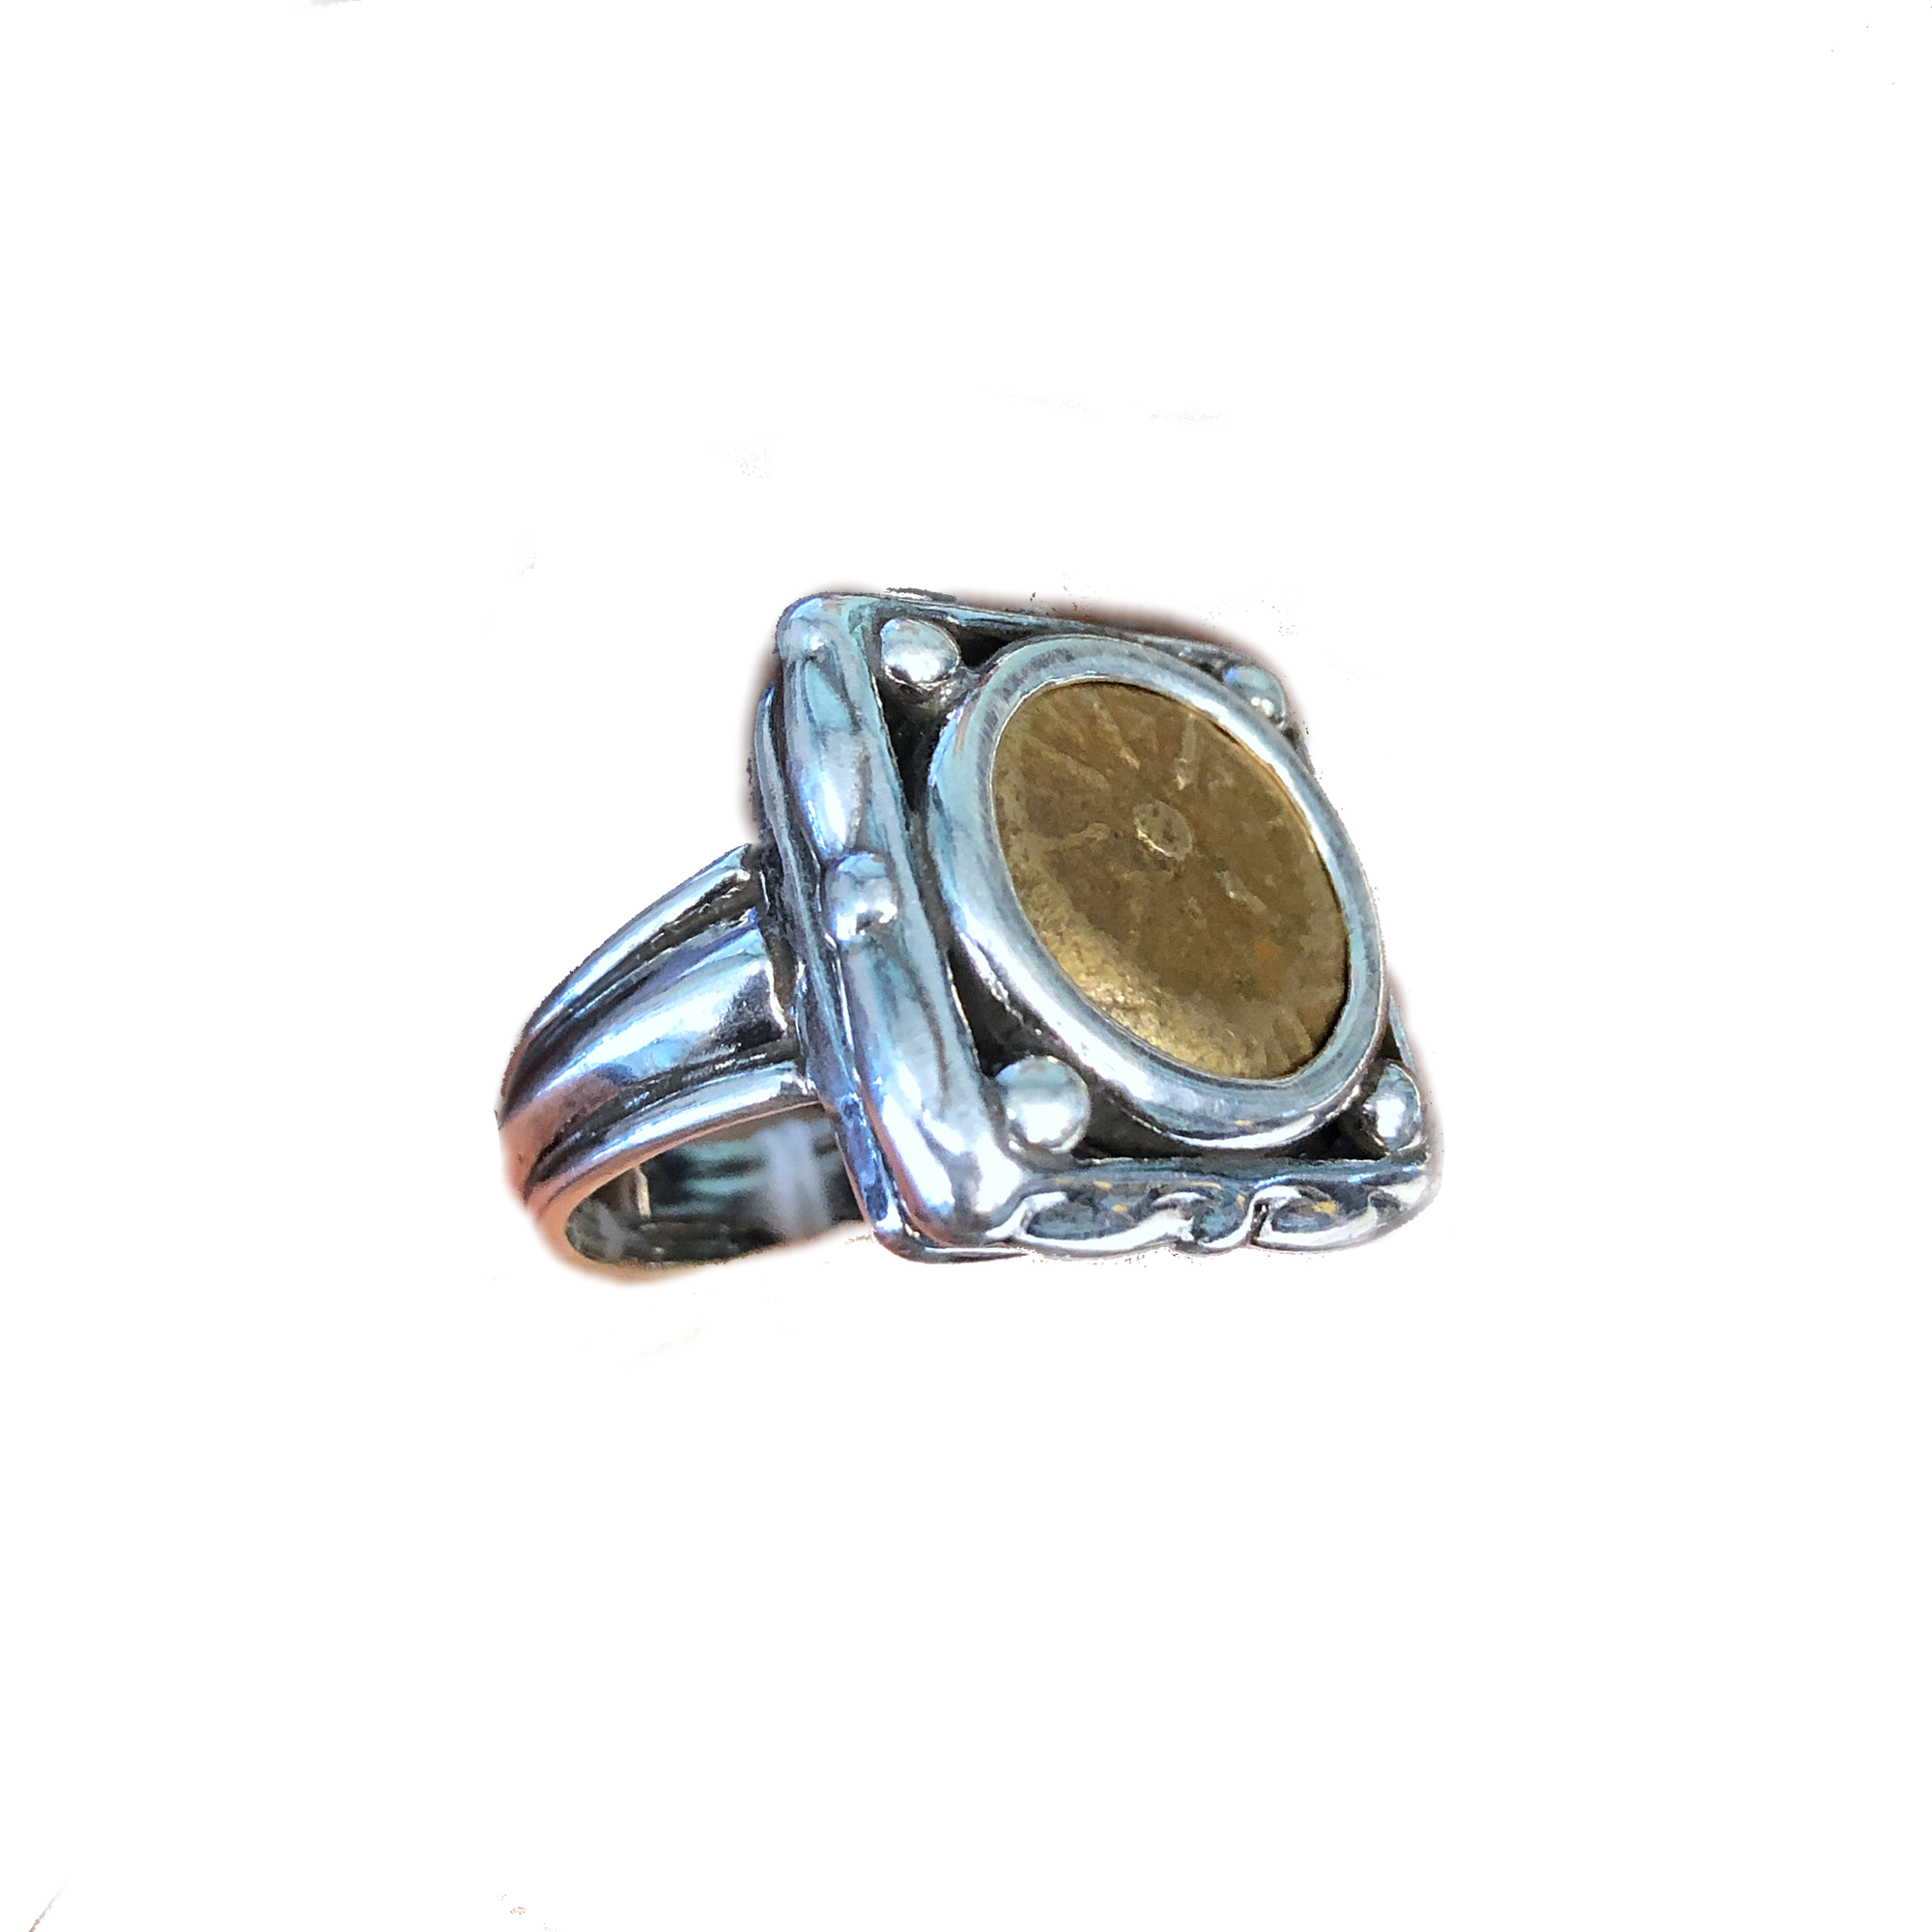 Widows Mite Square Ring - Mounted in Sterling Silver.